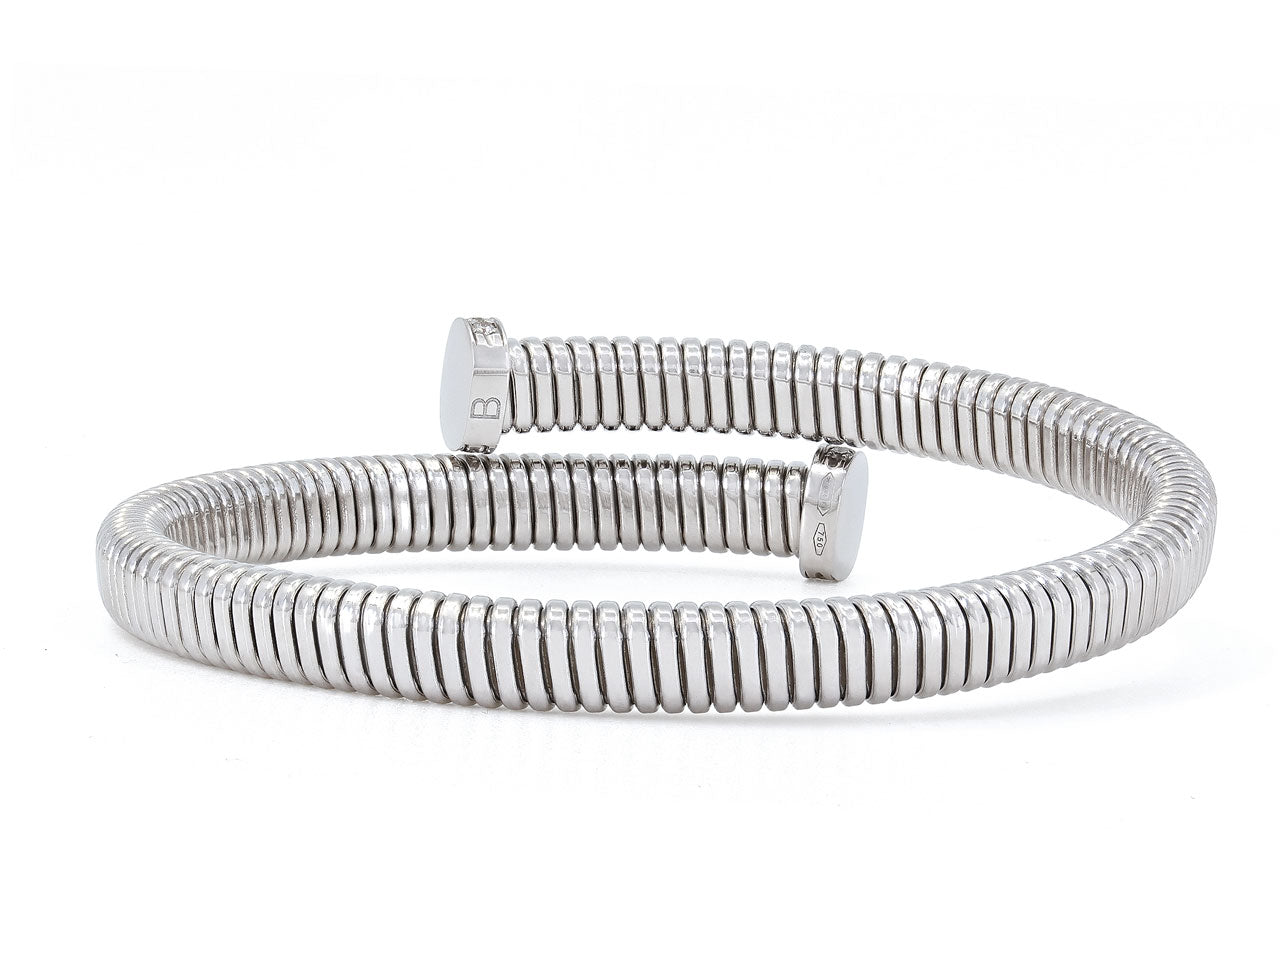 Tubogas Bypass Bracelet with Nail Head Terminals in 18K White Gold, by Beladora